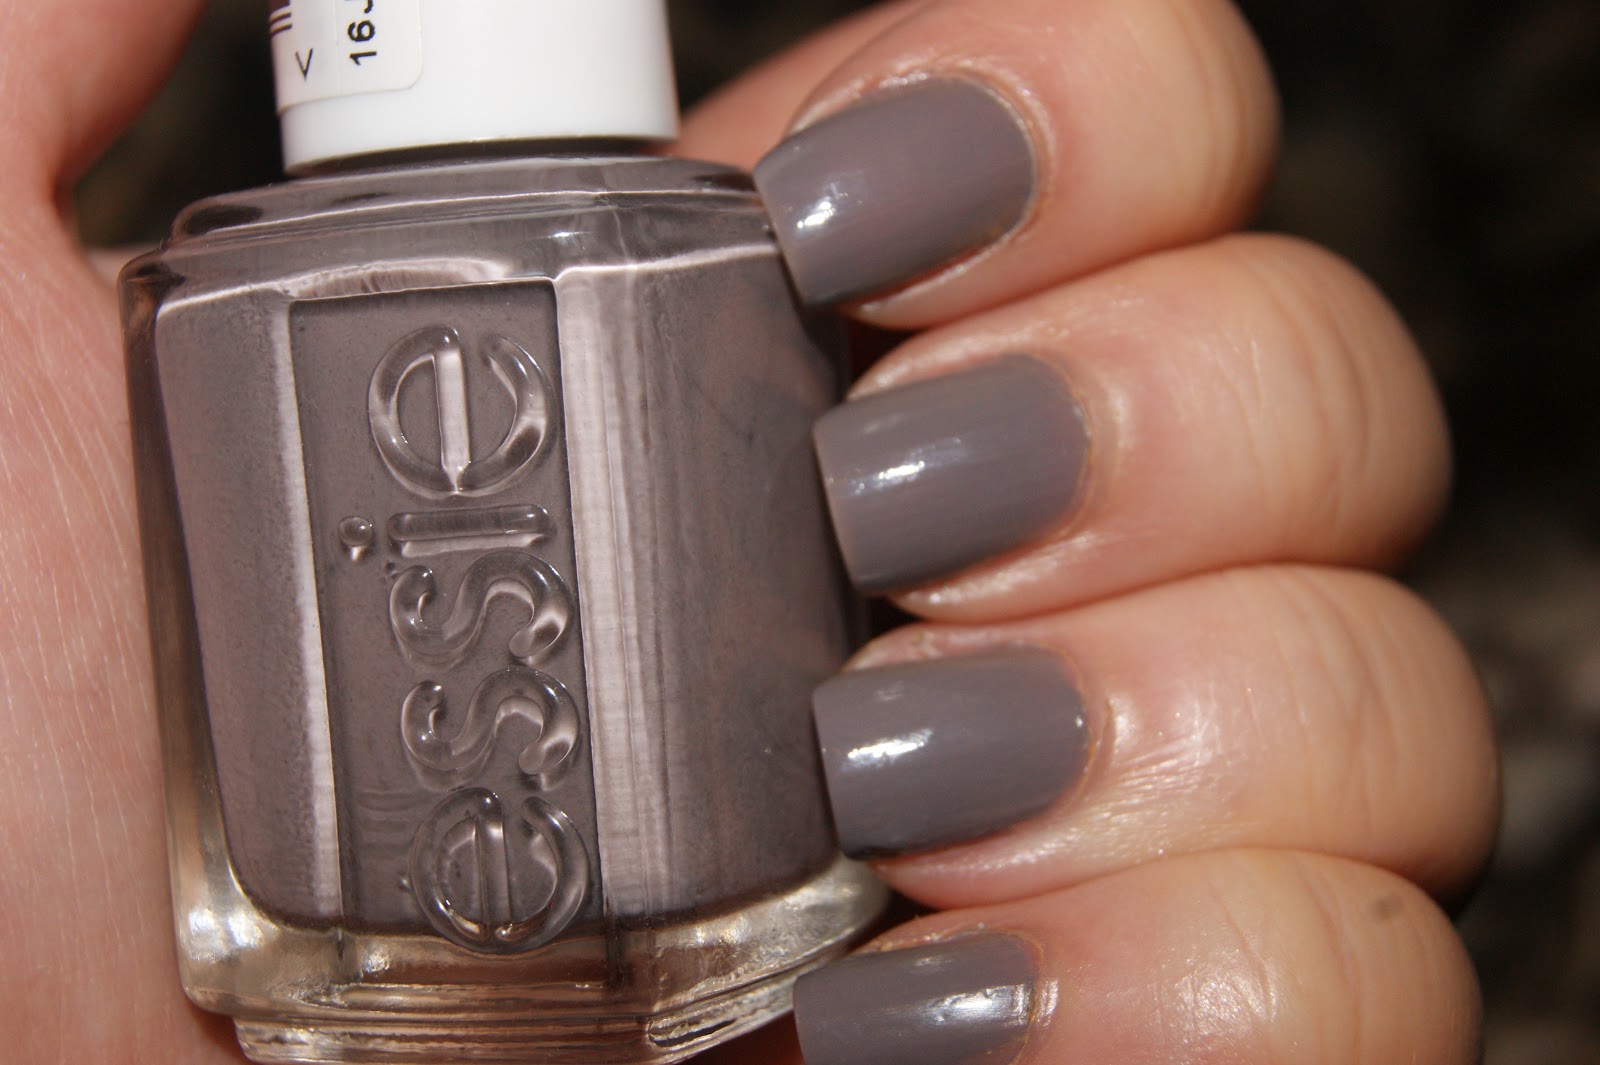 9. Essie Nail Polish in "Chinchilly" - wide 6